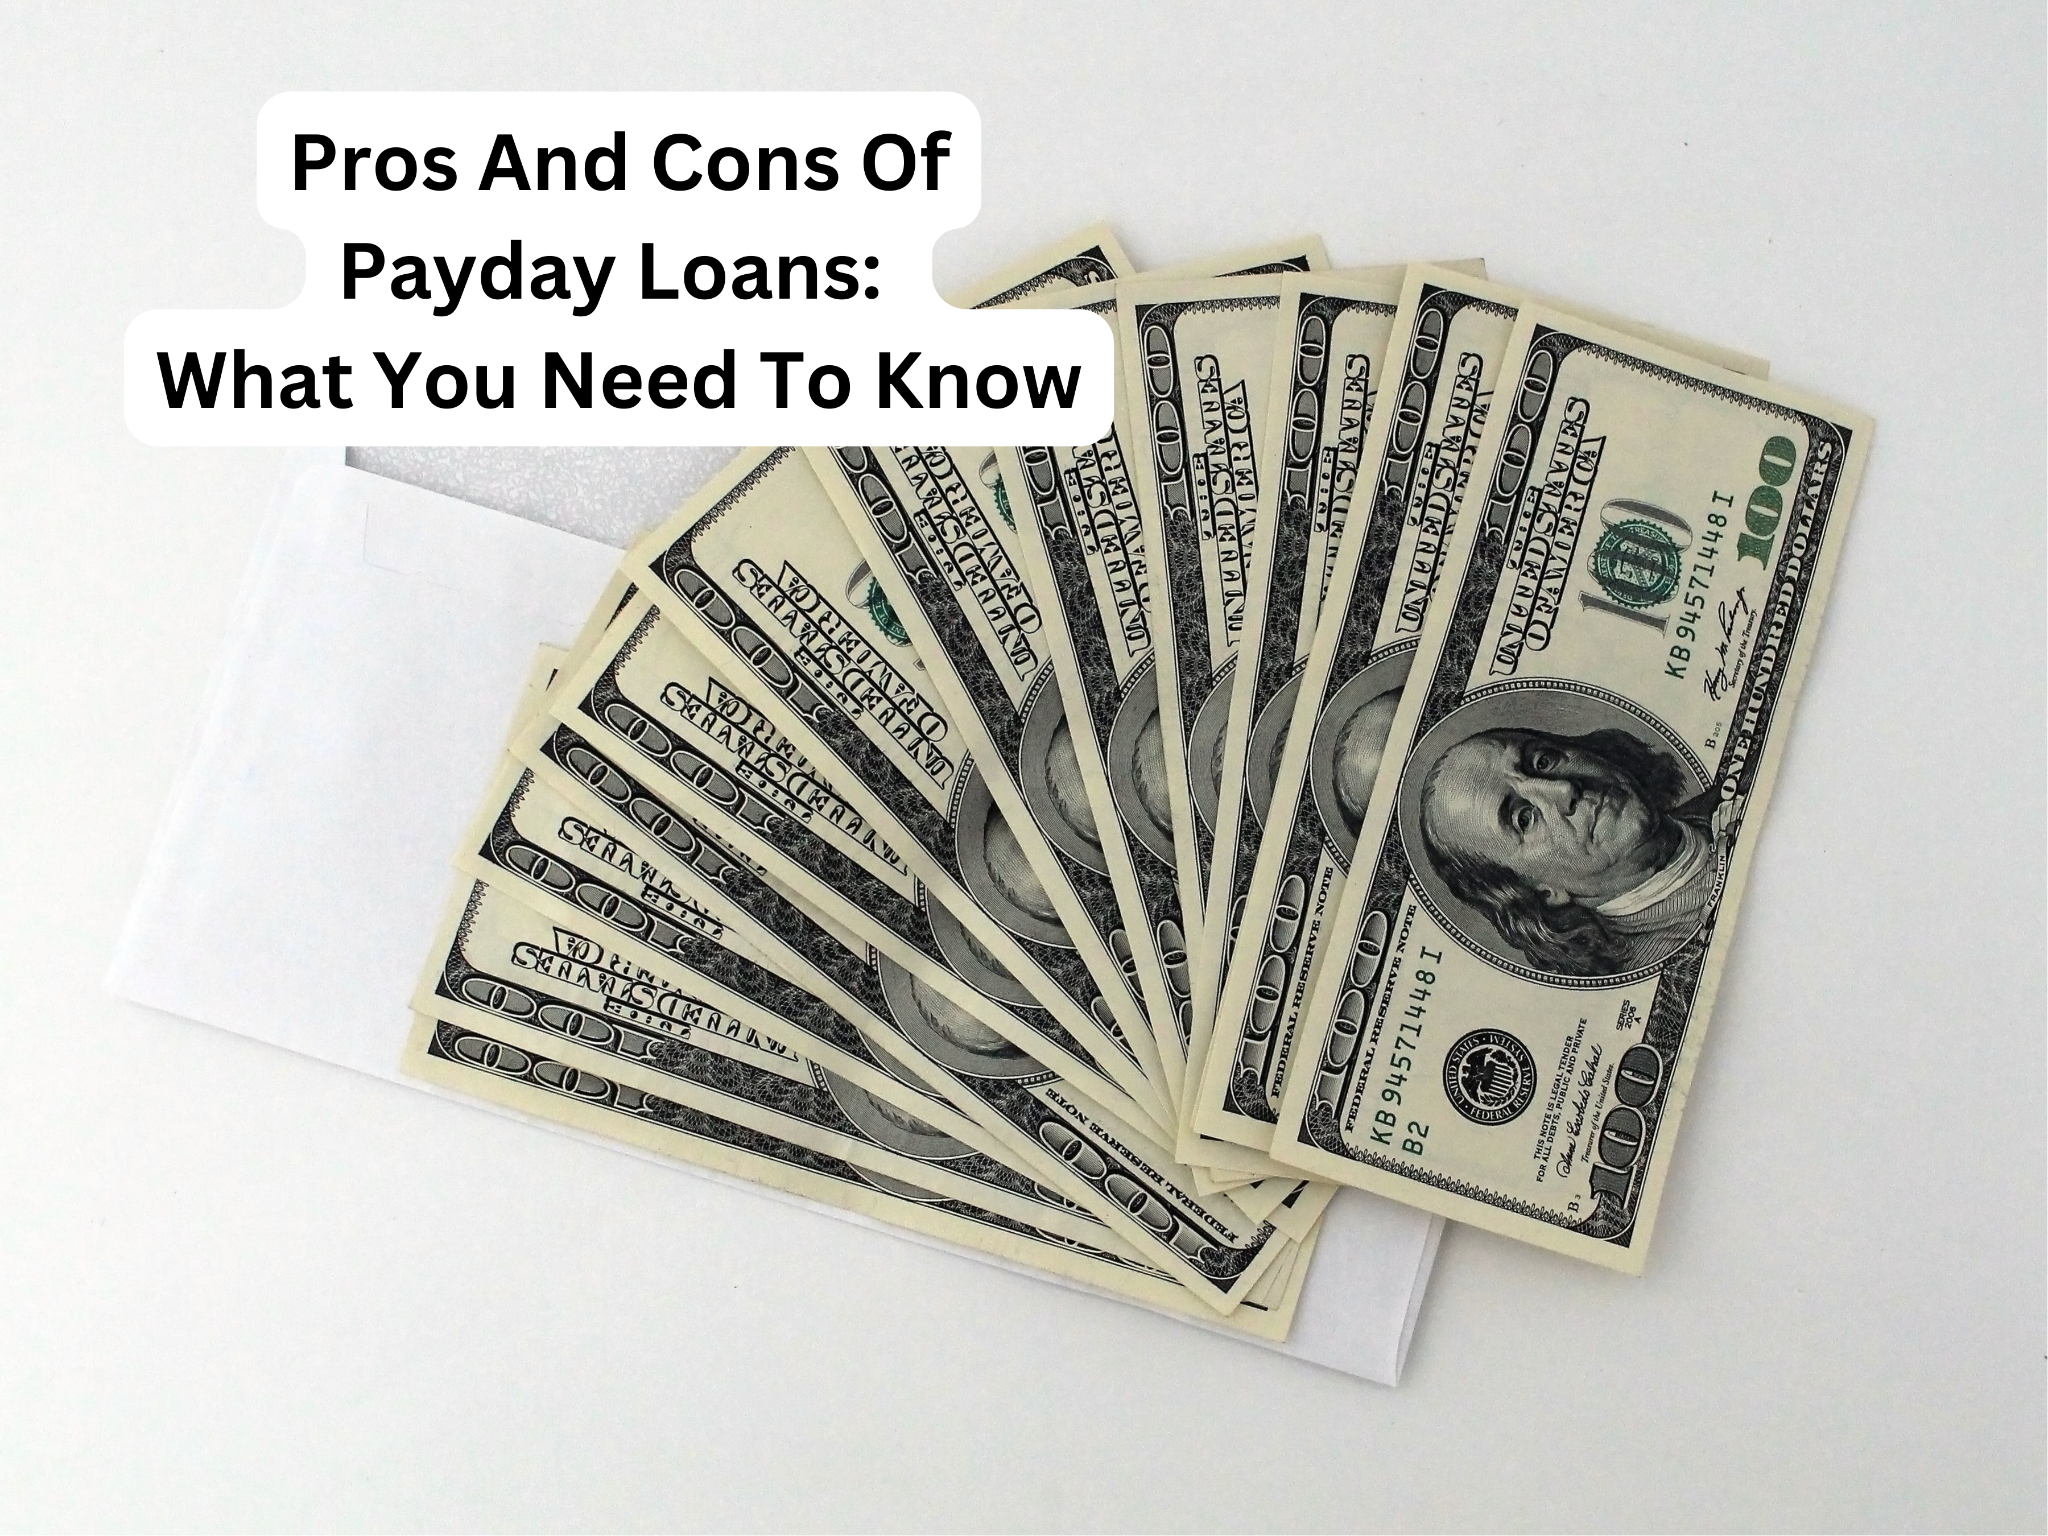 Pros And Cons Of Payday Loans: What You Need To Know